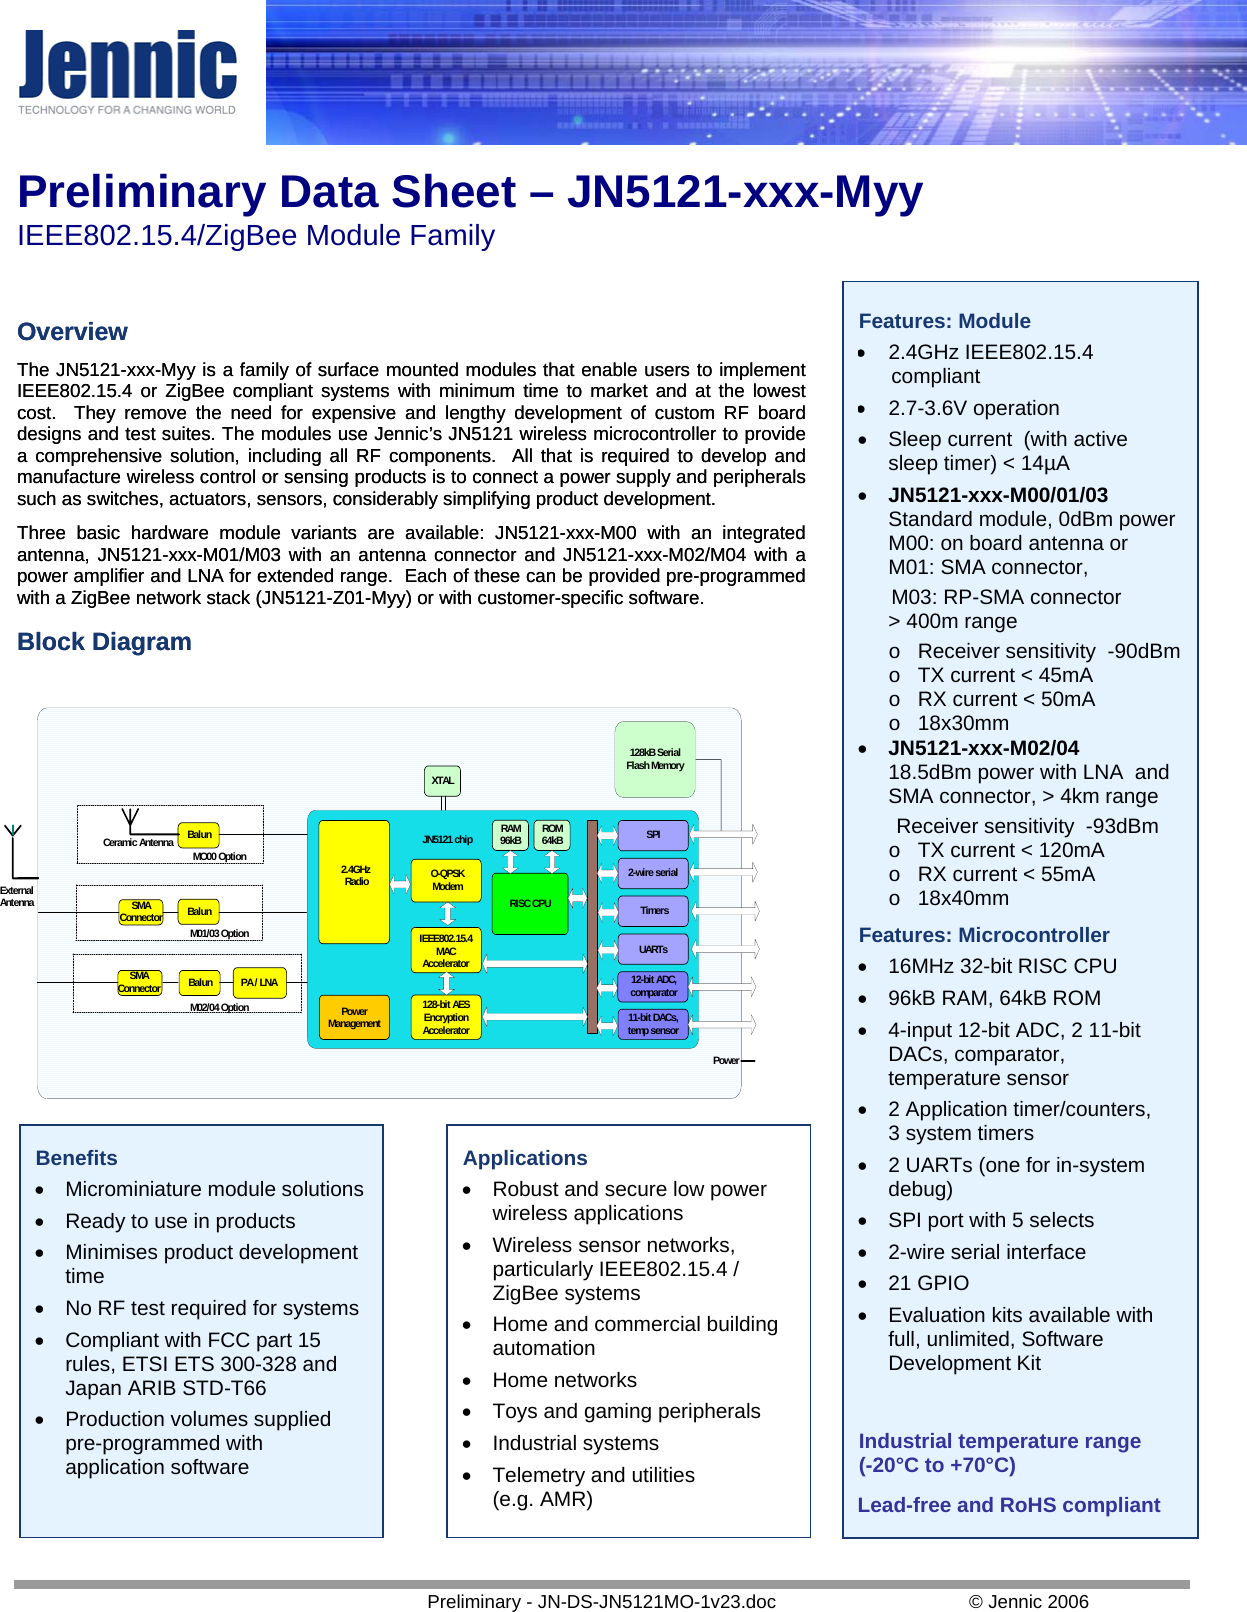 Preliminary Data Sheet – JN5121-xxx-Myy  IEEE802.15.4/ZigBee Module Family   Preliminary - JN-DS-JN5121MO-1v23.doc  © Jennic 2006   Features: Module • 2.4GHz IEEE802.15.4 compliant • 2.7-3.6V operation • Sleep current  (with active sleep timer) &lt; 14µA • JN5121-xxx-M00/01/03  Standard module, 0dBm power  M00: on board antenna or  M01: SMA connector, M03: RP-SMA connector   &gt; 400m range o  Receiver sensitivity  -90dBmo  TX current &lt; 45mA  o  RX current &lt; 50mA o  18x30mm • JN5121-xxx-M02/04   18.5dBm power with LNA  and SMA connector, &gt; 4km range  Receiver sensitivity  -93dBm o  TX current &lt; 120mA  o  RX current &lt; 55mA o  18x40mm Features: Microcontroller • 16MHz 32-bit RISC CPU • 96kB RAM, 64kB ROM • 4-input 12-bit ADC, 2 11-bit DACs, comparator, temperature sensor • 2 Application timer/counters,  3 system timers • 2 UARTs (one for in-system debug) • SPI port with 5 selects • 2-wire serial interface • 21 GPIO • Evaluation kits available with full, unlimited, Software Development Kit      Industrial temperature range (-20°C to +70°C)  Lead-free and RoHS compliant Overview Overview The JN5121-xxx-Myy is a family of surface mounted modules that enable users to implement IEEE802.15.4 or ZigBee compliant systems with minimum time to market and at the lowest cost.  They remove the need for expensive and lengthy development of custom RF board designs and test suites. The modules use Jennic’s JN5121 wireless microcontroller to provide a comprehensive solution, including all RF components.  All that is required to develop and manufacture wireless control or sensing products is to connect a power supply and peripherals such as switches, actuators, sensors, considerably simplifying product development. The JN5121-xxx-Myy is a family of surface mounted modules that enable users to implement IEEE802.15.4 or ZigBee compliant systems with minimum time to market and at the lowest cost.  They remove the need for expensive and lengthy development of custom RF board designs and test suites. The modules use Jennic’s JN5121 wireless microcontroller to provide a comprehensive solution, including all RF components.  All that is required to develop and manufacture wireless control or sensing products is to connect a power supply and peripherals such as switches, actuators, sensors, considerably simplifying product development. Three basic hardware module variants are available: JN5121-xxx-M00 with an integrated antenna, JN5121-xxx-M01/M03 with an antenna connector and JN5121-xxx-M02/M04 with a power amplifier and LNA for extended range.  Each of these can be provided pre-programmed with a ZigBee network stack (JN5121-Z01-Myy) or with customer-specific software. Three basic hardware module variants are available: JN5121-xxx-M00 with an integrated antenna, JN5121-xxx-M01/M03 with an antenna connector and JN5121-xxx-M02/M04 with a power amplifier and LNA for extended range.  Each of these can be provided pre-programmed with a ZigBee network stack (JN5121-Z01-Myy) or with customer-specific software. Block Diagram Block Diagram                     TimersUARTs12-bit ADC,comparator11-bit DACs,temp sensor2-wire serialSPIRAM96kB128-bit AESEncryptionAccelerator2.4GHz RadioROM64kBRISC CPUPowerManagementXTALO-QPSKModemIEEE802.15.4MACAccelerator128kB SerialFlash MemoryJN5121 chipPowerBalunSMAConnectorBalunCeramic AntennaBalunSMAConnector PA / LNAExternalAntennaMO00 OptionM01/03 OptionM02/04 Option      Benefits • Microminiature module solutions • Ready to use in products • Minimises product development time • No RF test required for systems • Compliant with FCC part 15 rules, ETSI ETS 300-328 and Japan ARIB STD-T66 • Production volumes supplied pre-programmed with application software Applications • Robust and secure low power wireless applications • Wireless sensor networks, particularly IEEE802.15.4 / ZigBee systems • Home and commercial building automation • Home networks • Toys and gaming peripherals • Industrial systems • Telemetry and utilities (e.g. AMR) 